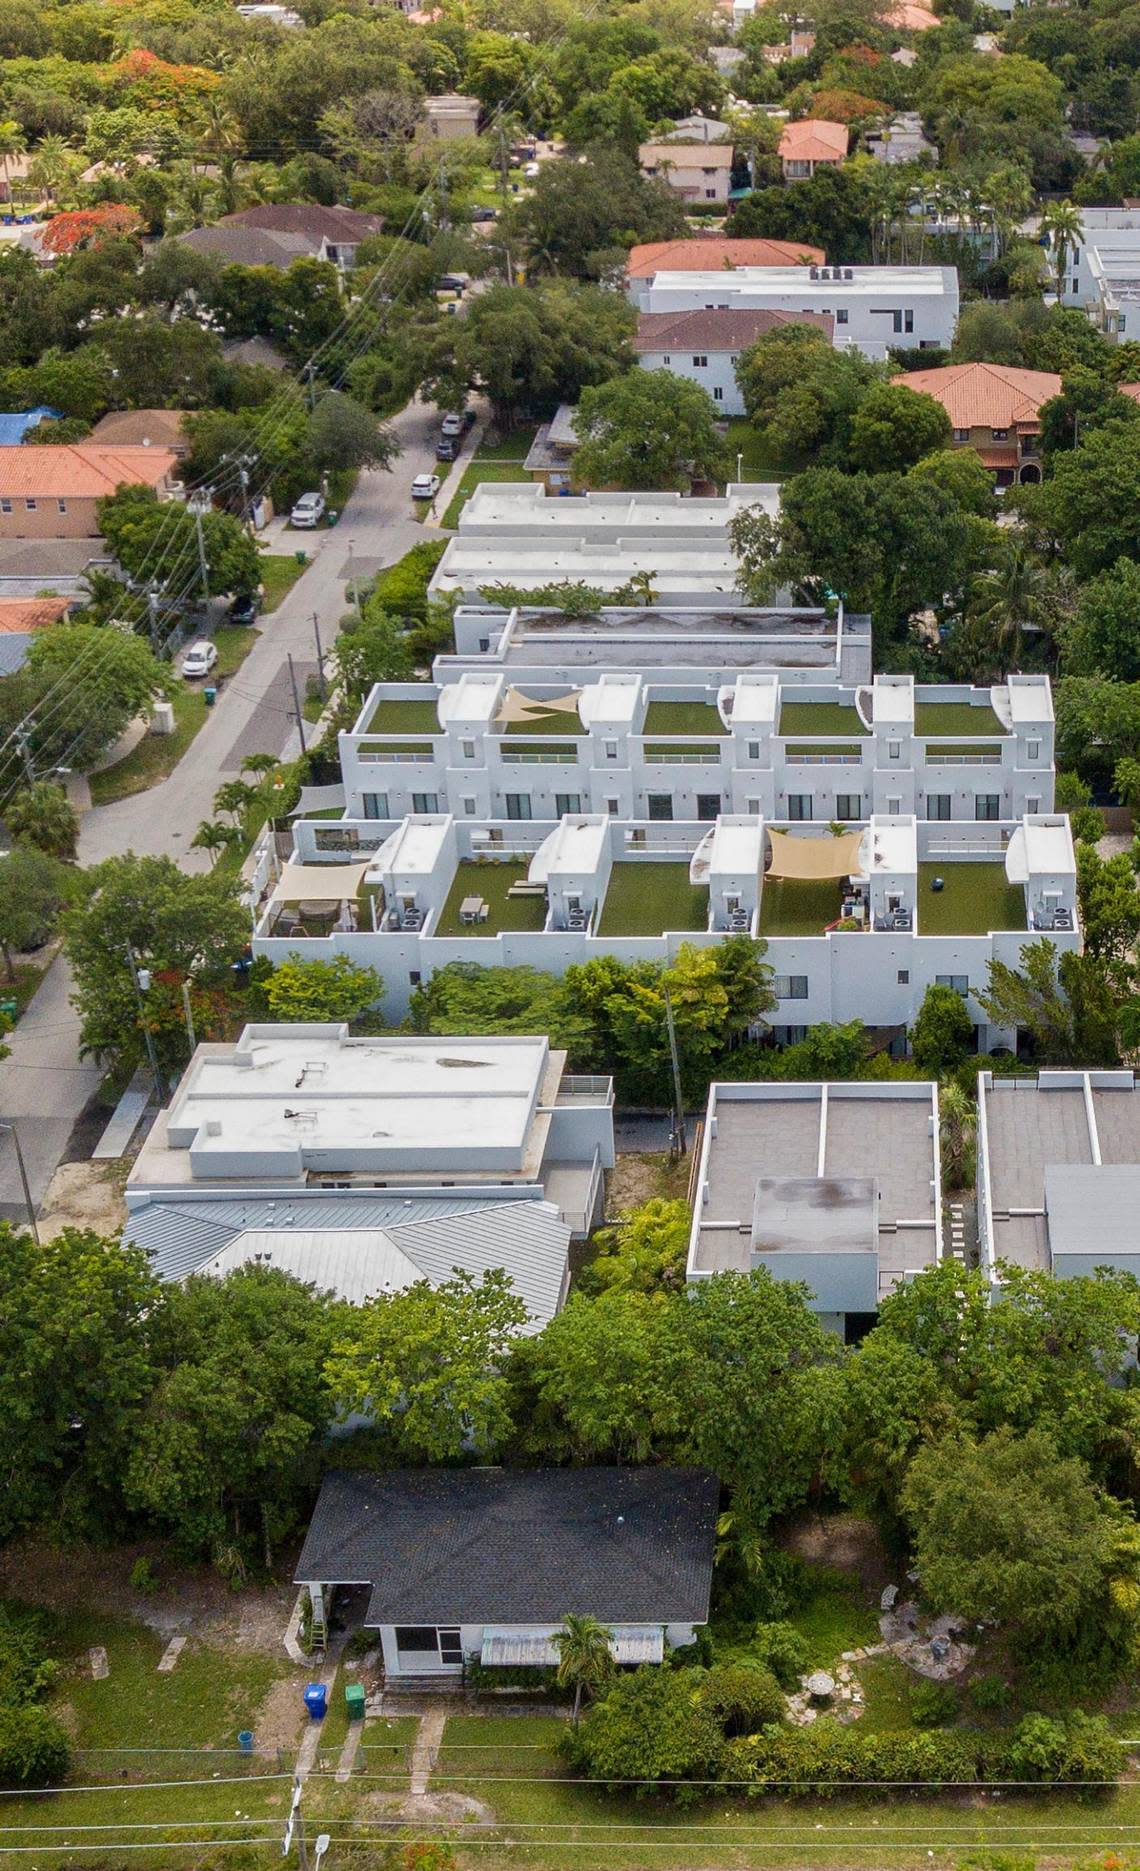 Luxury homes and townhouses are being built along what was once a street of modest homes in Miami’s historically Black West Coconut Grove.